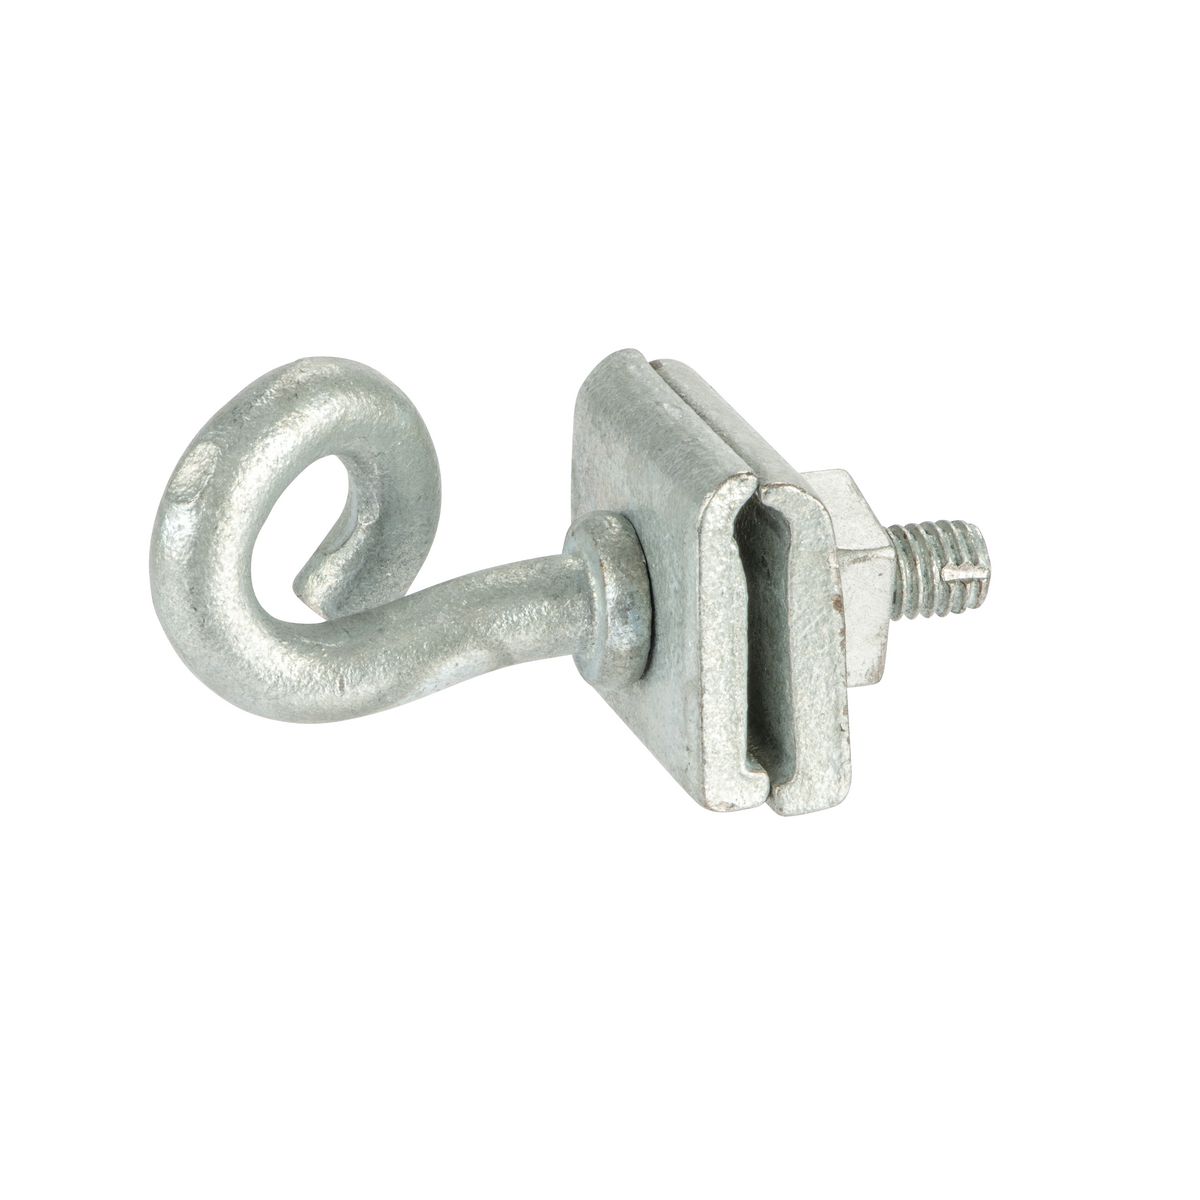 Electrical Six Bolt Clamp in Ojo - Electrical Hand Tools, Emmanuel